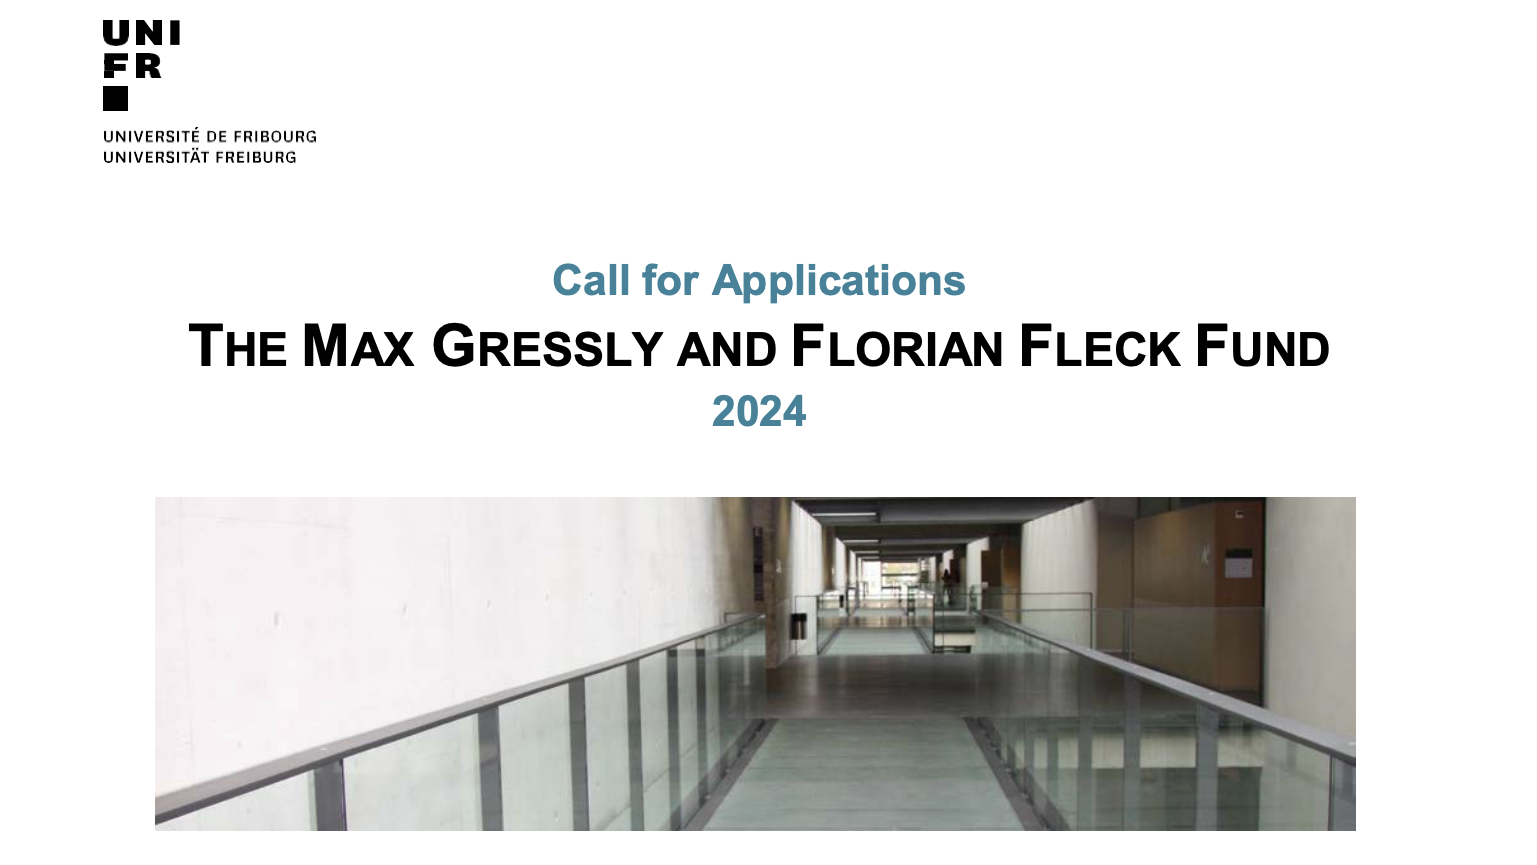 Call for applications – The Max Gressly and Florian Fleck Fund